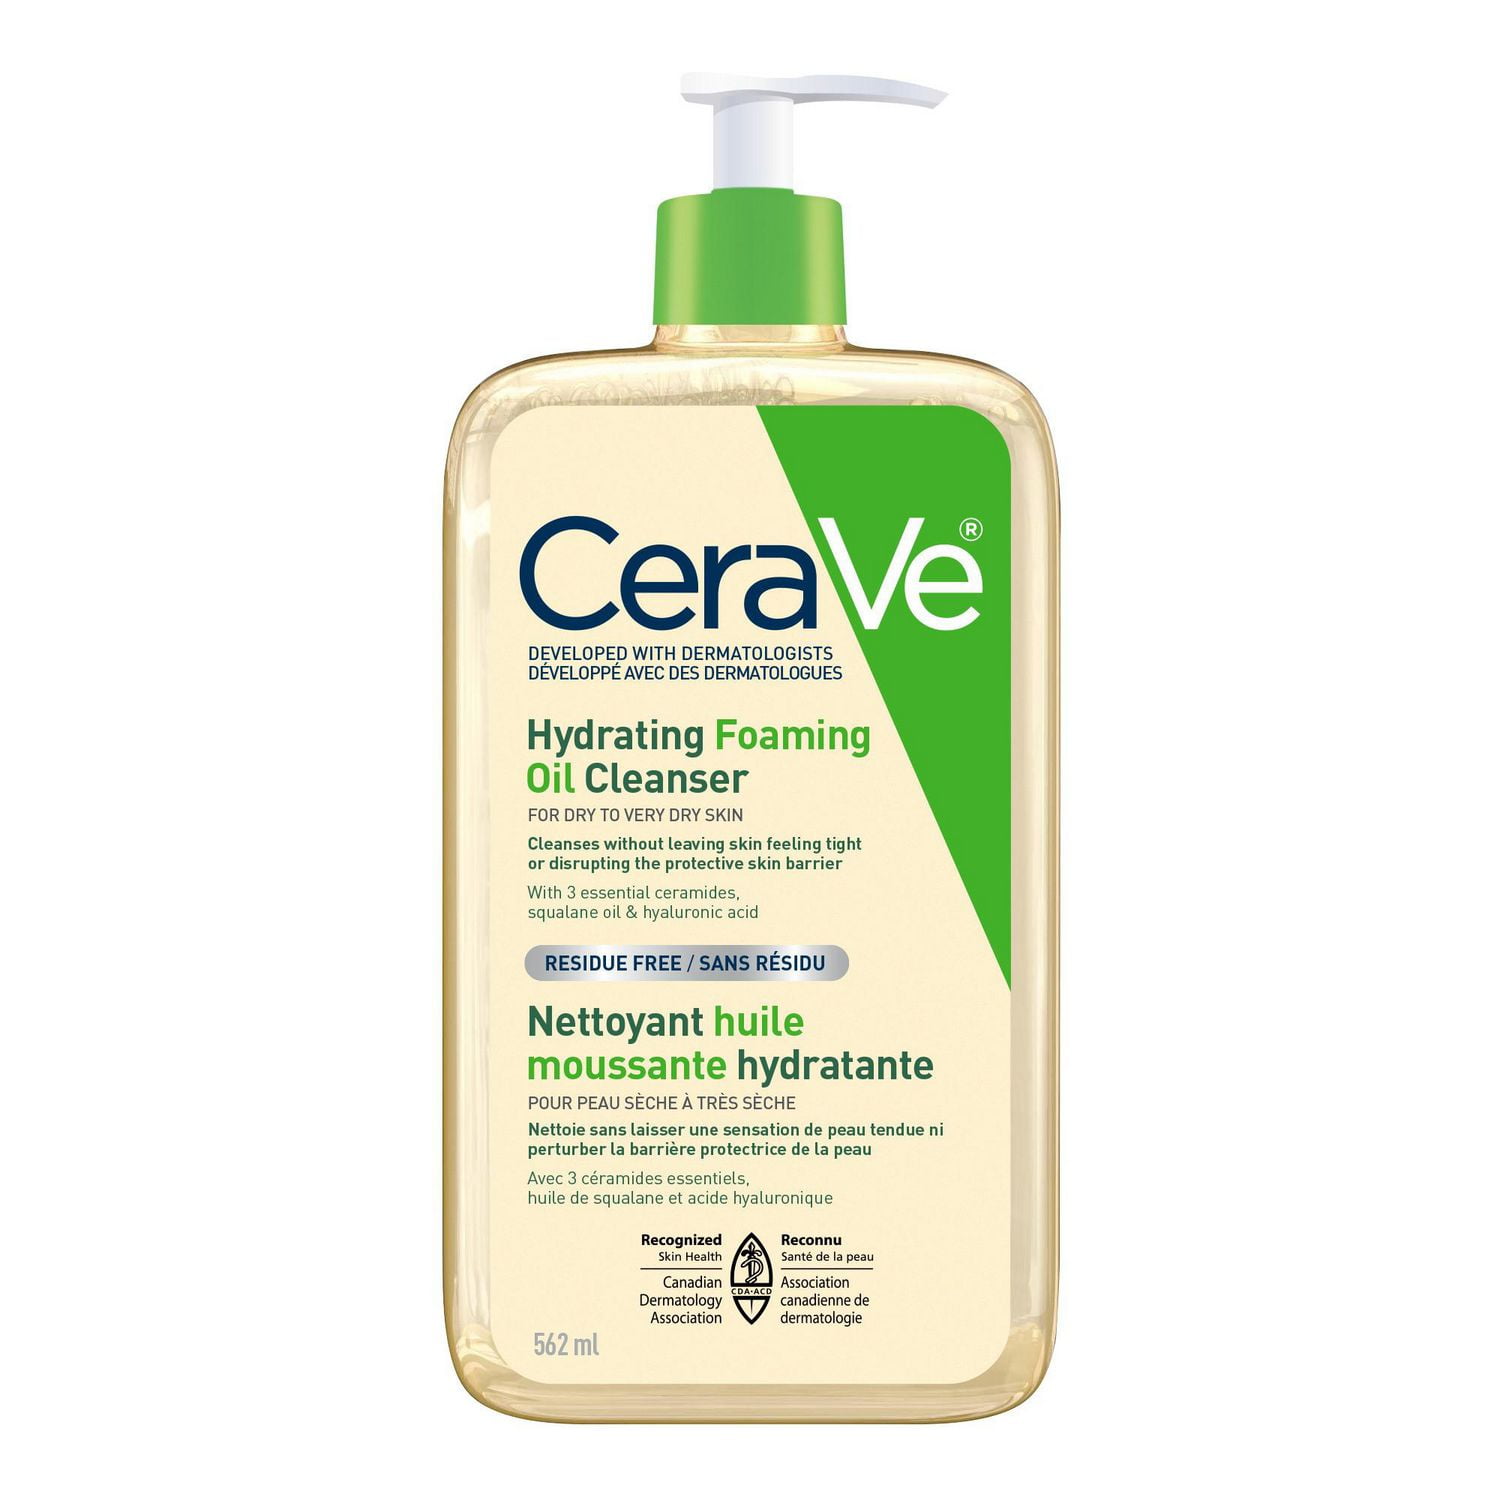 CeraVe Hydrating Foaming Oil Cleanser, Face & Body Wash with Squalane Oil, Hyaluronic  Acid and Ceramides, For Dry to Very Dry Skin